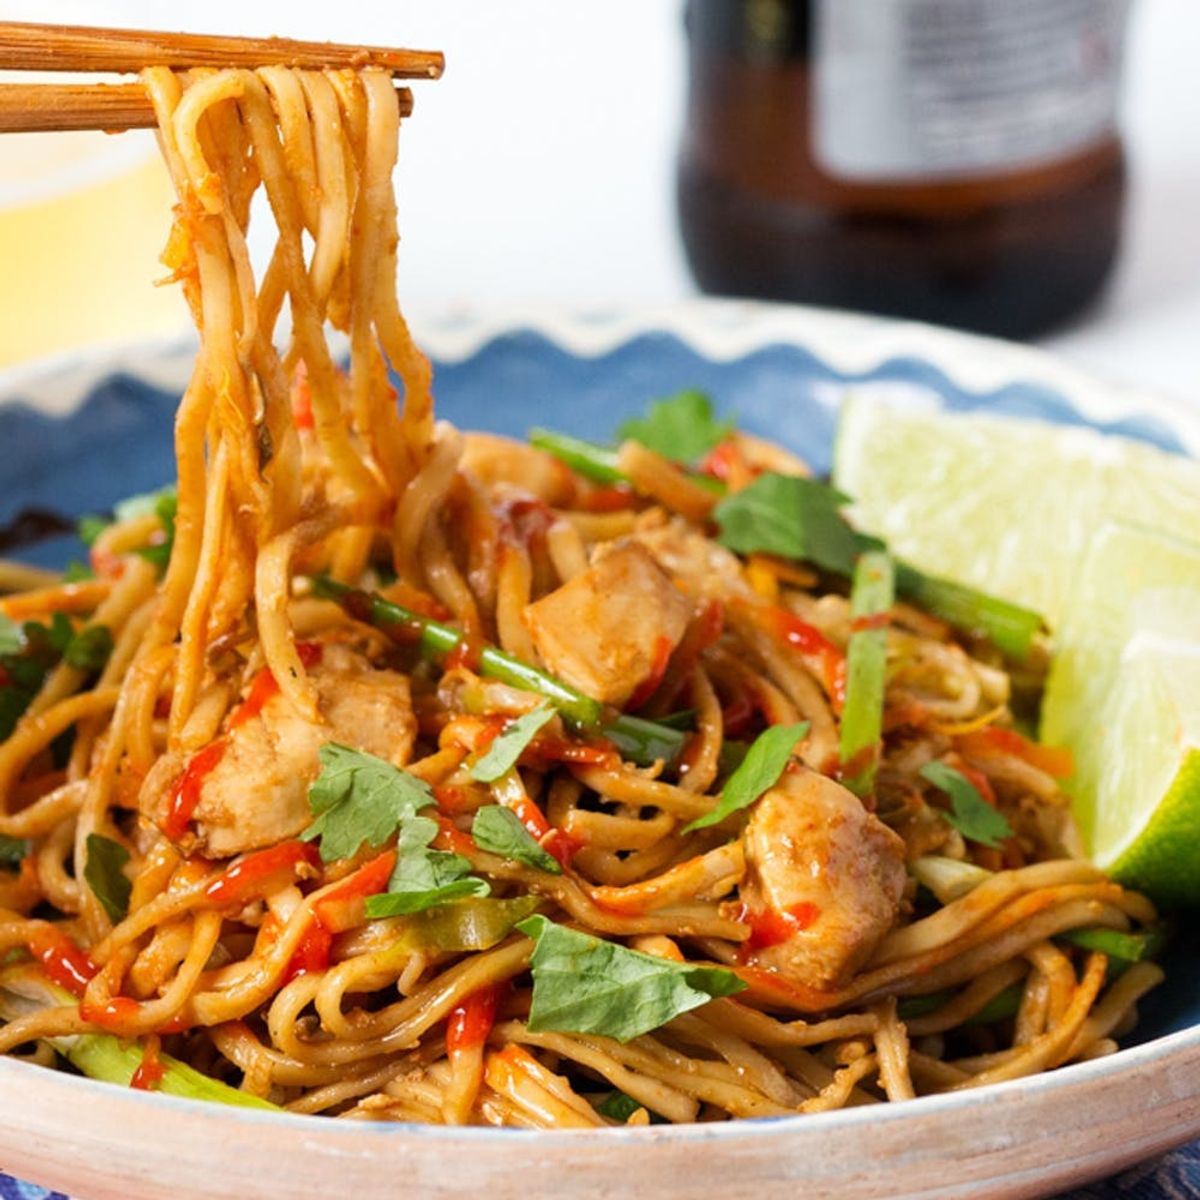 How to Pack Serious Flavor into Your Noodles